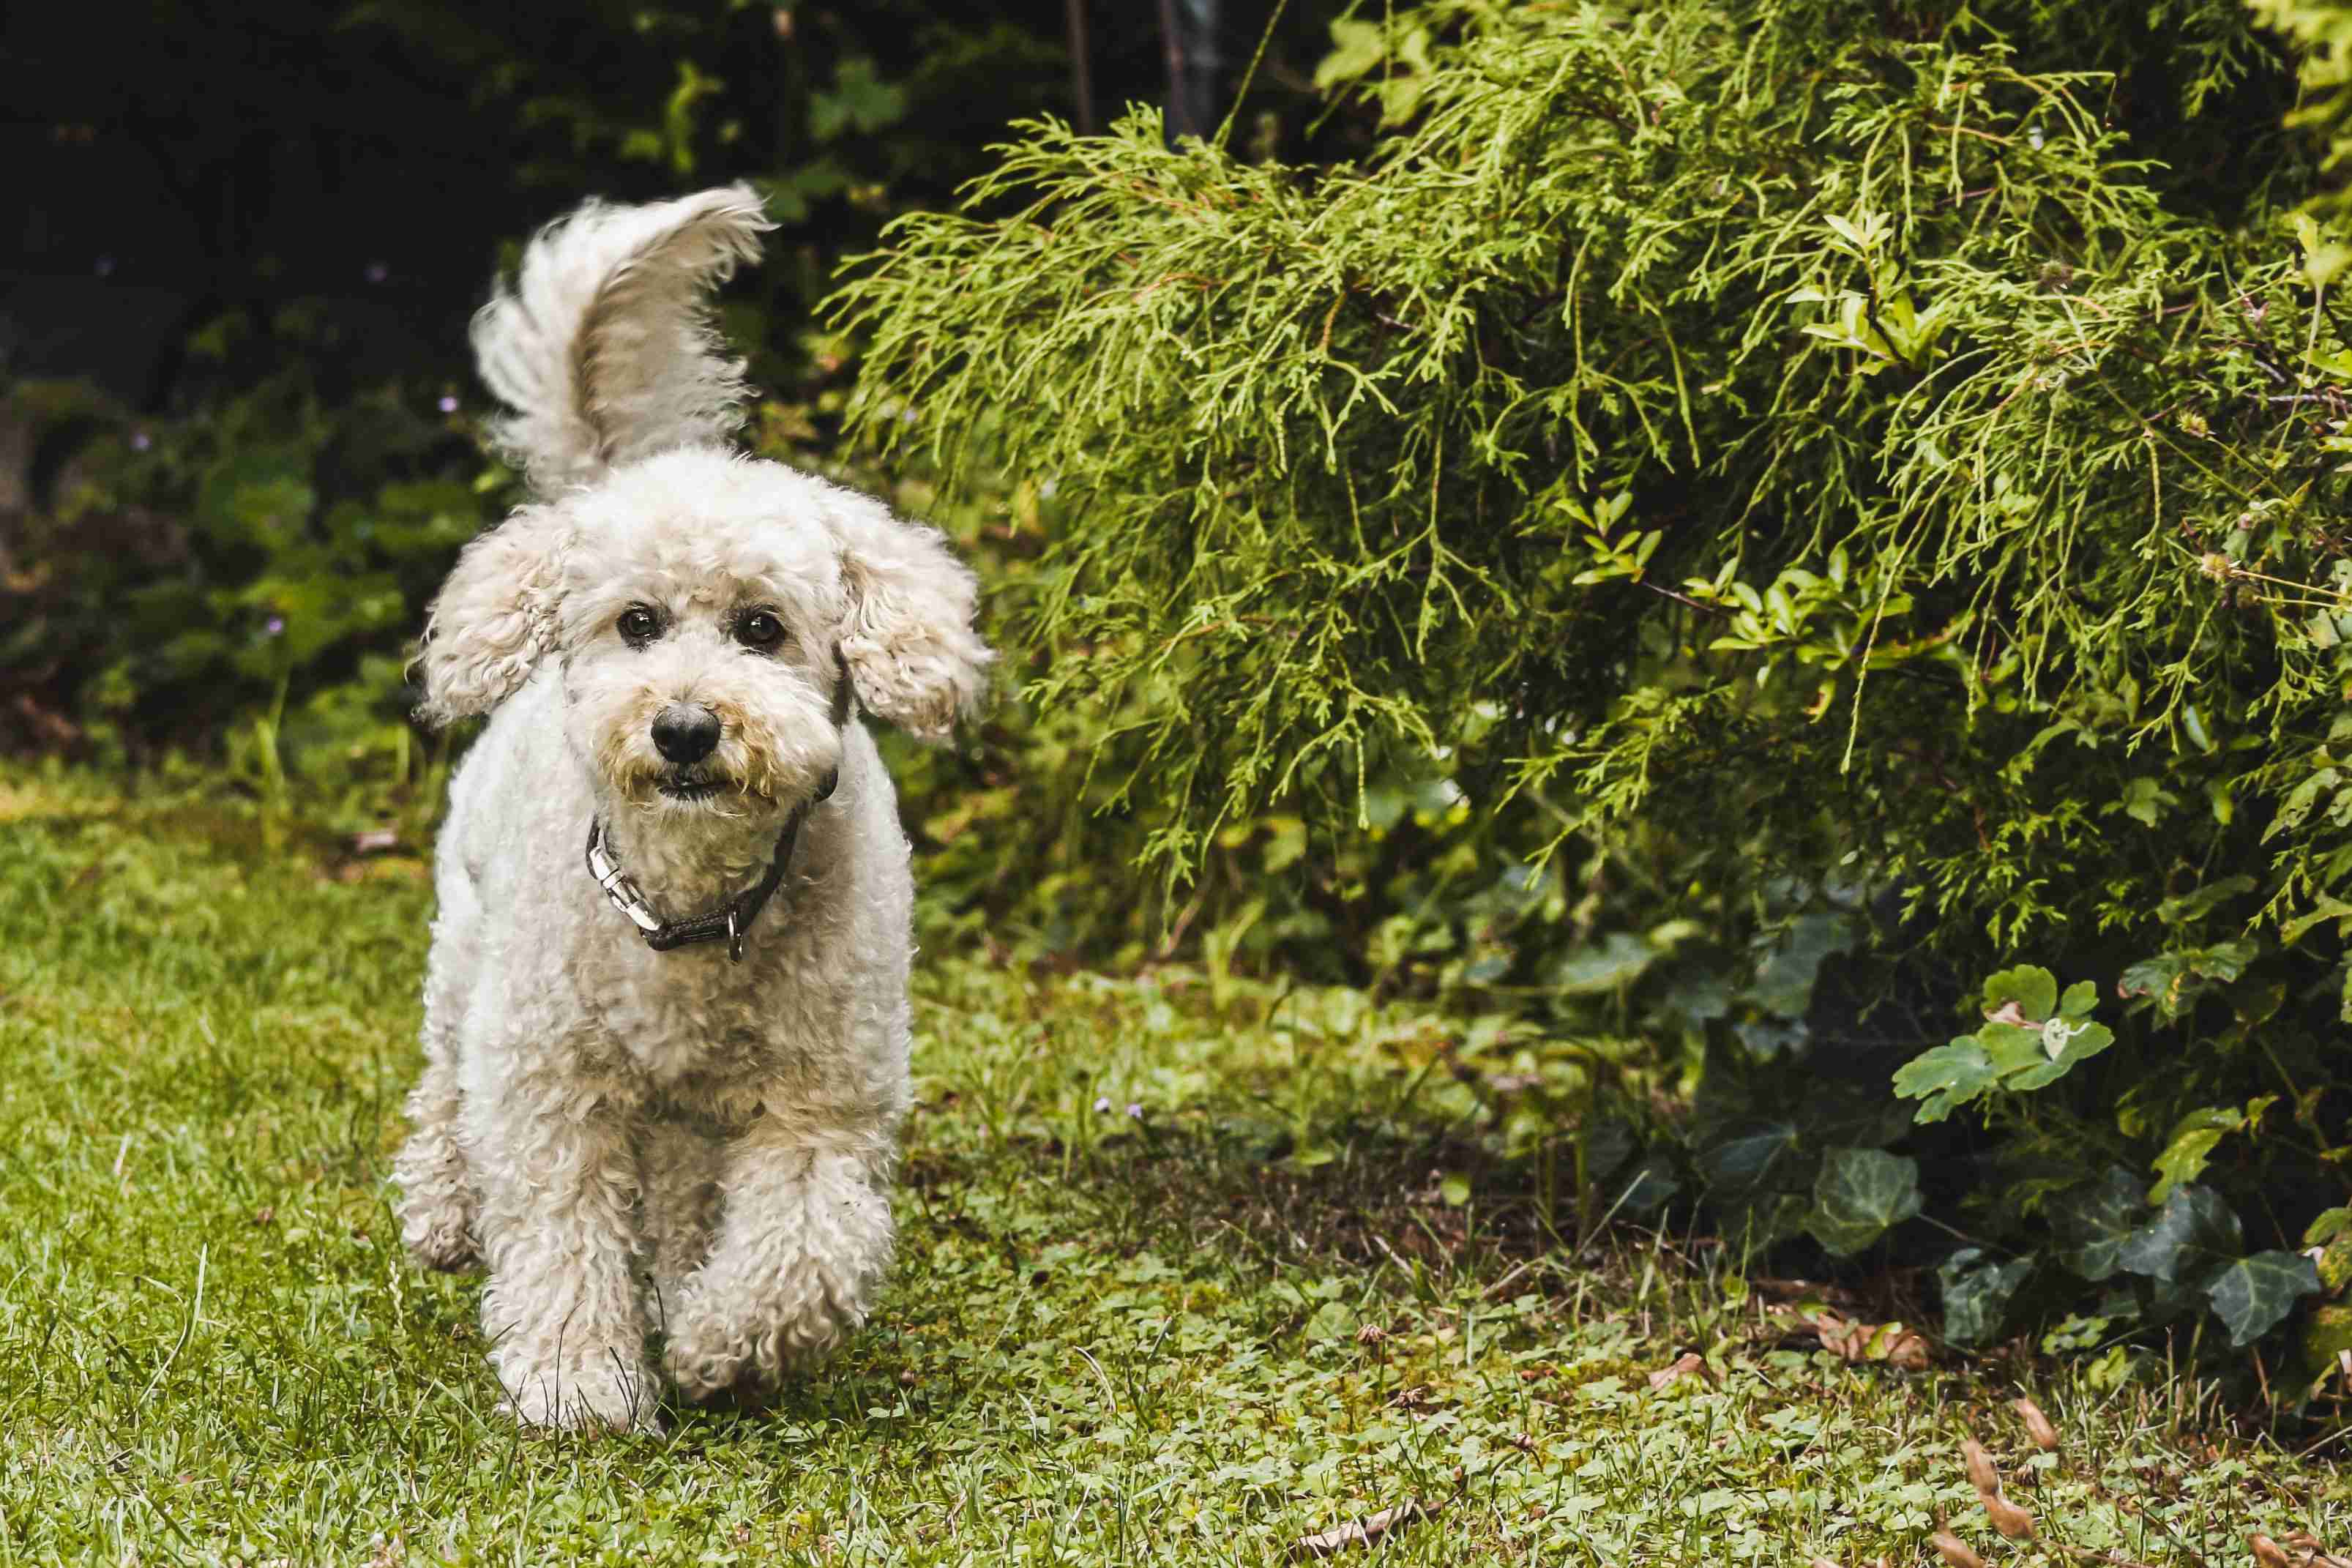 Are Poodles prone to developing certain types of hormonal imbalances? What treatment options exist?